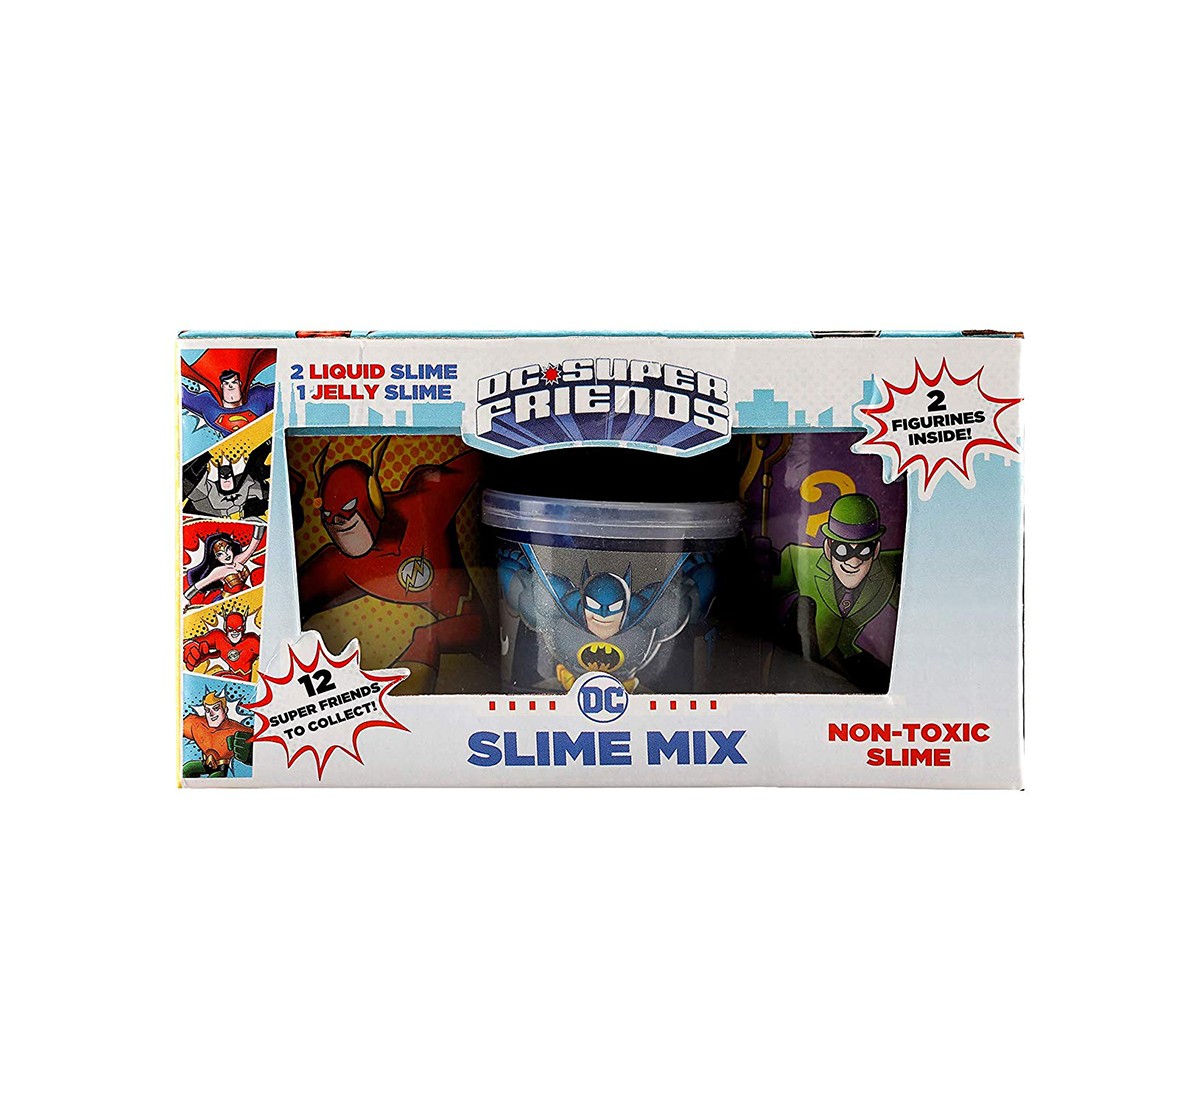 DC Super Friends Flash & Riddler Lantern Slime Mix with 2 Liquid & 1 Jelly Slime